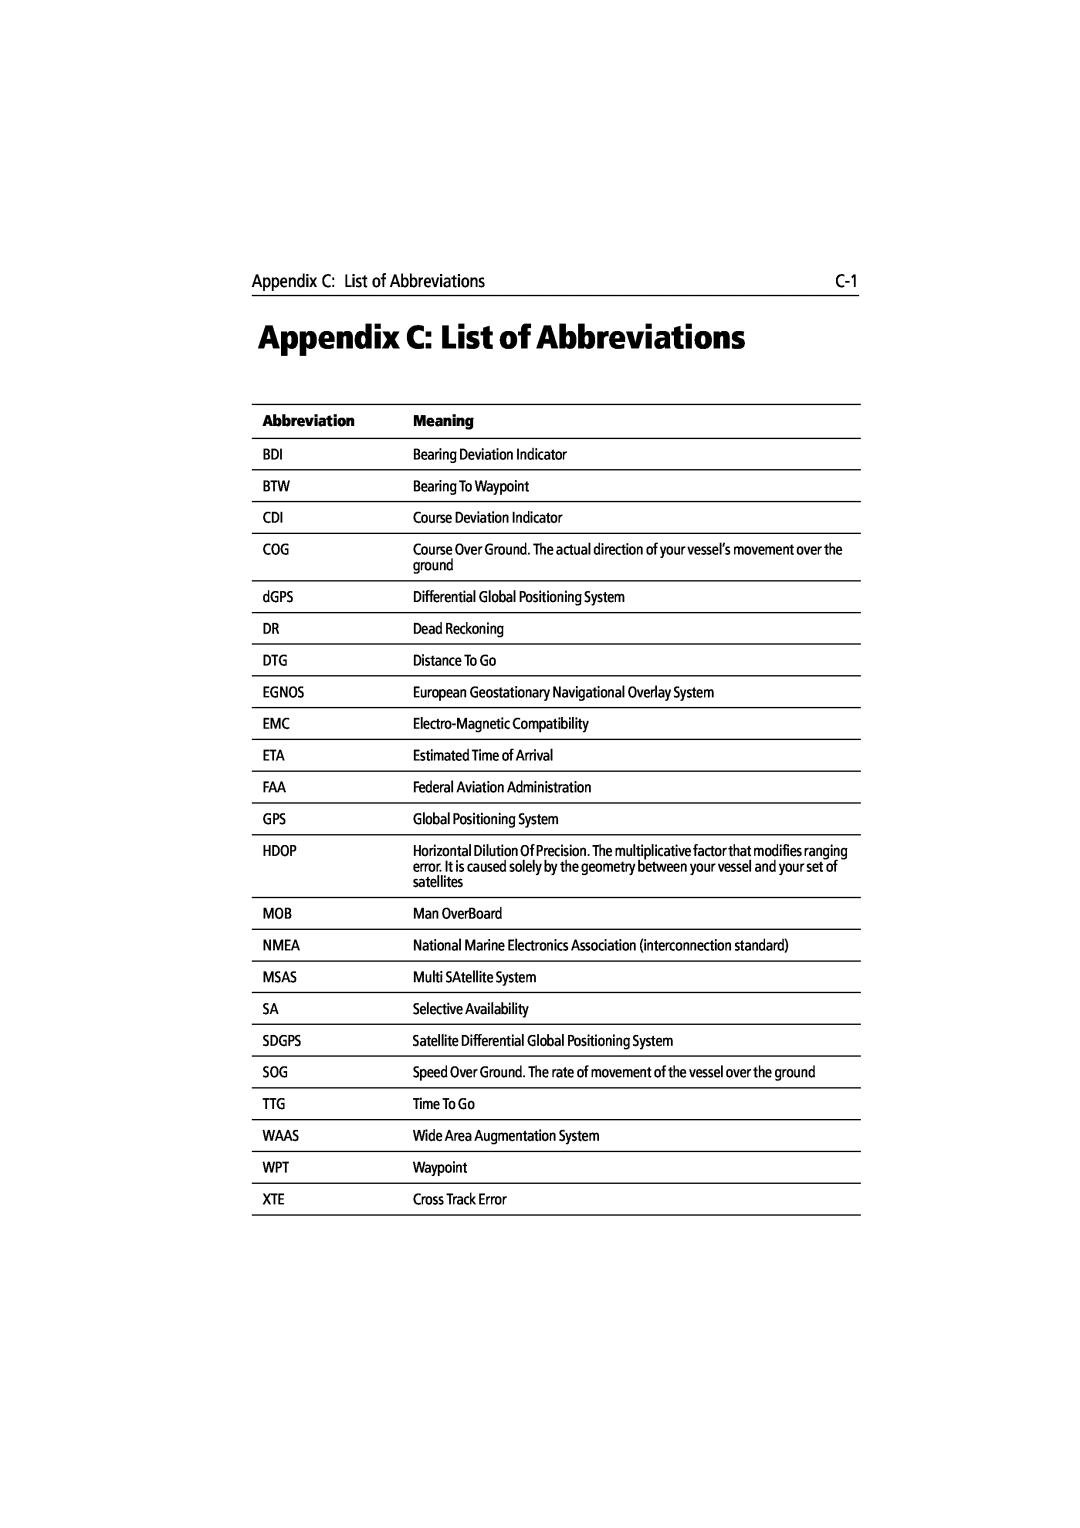 Raymarine 300 manual Appendix C List of Abbreviations, Meaning 